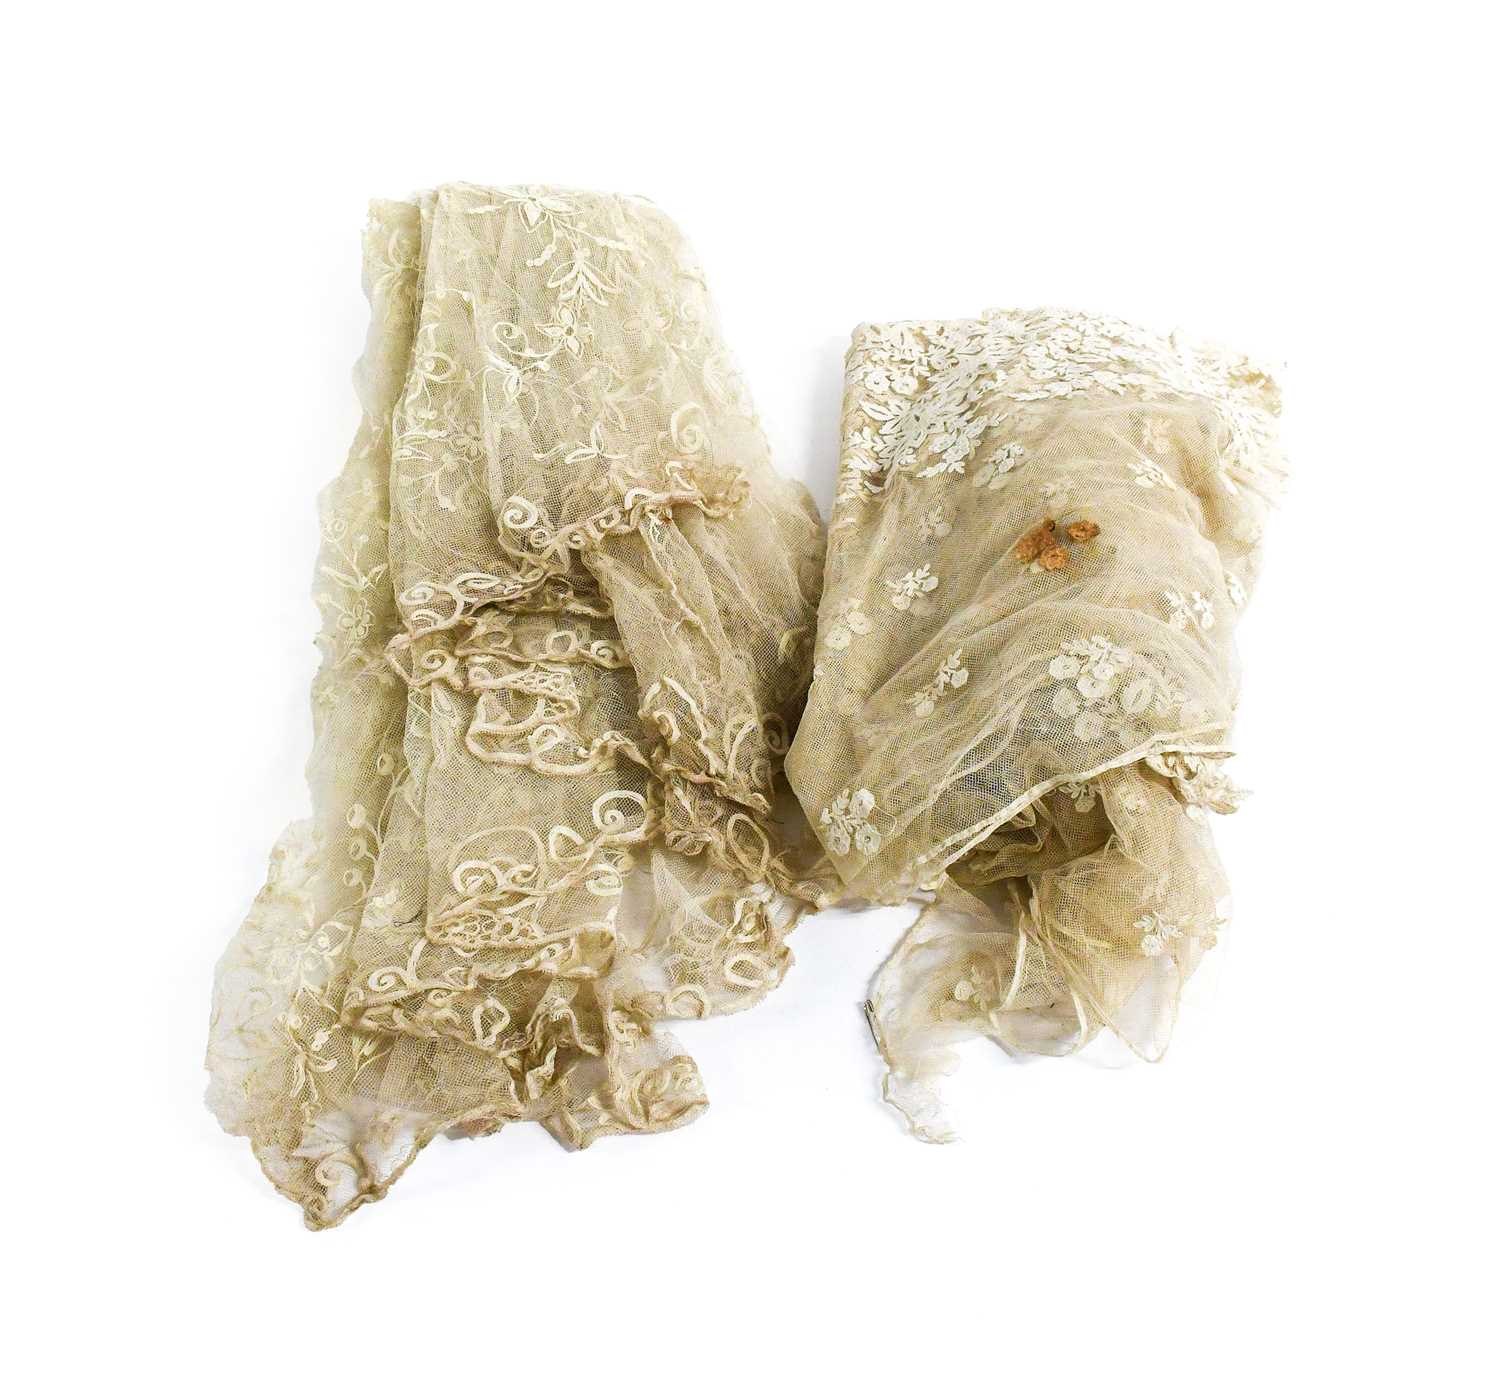 Early 20th Century Lace, comprising an embroidered net skirt mount decorated with floral sprigs, - Image 2 of 6